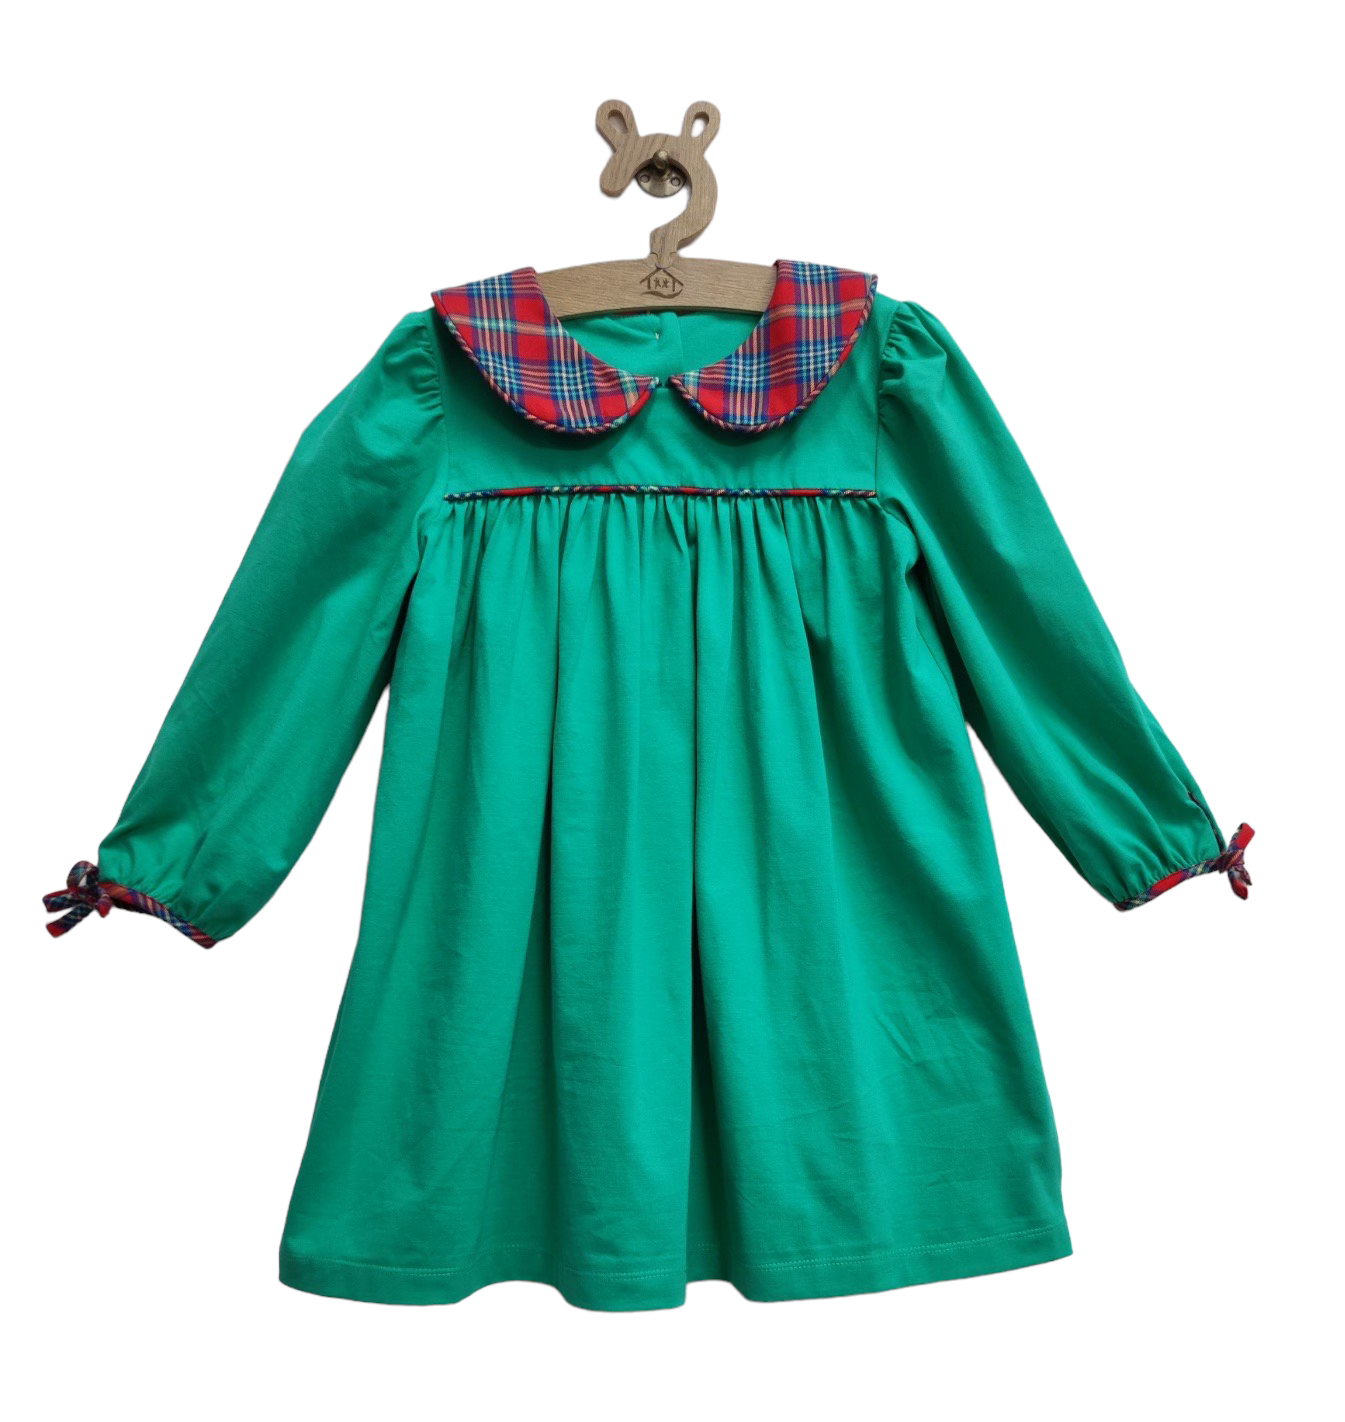 Madison Green with Red Plaid Collar Dress